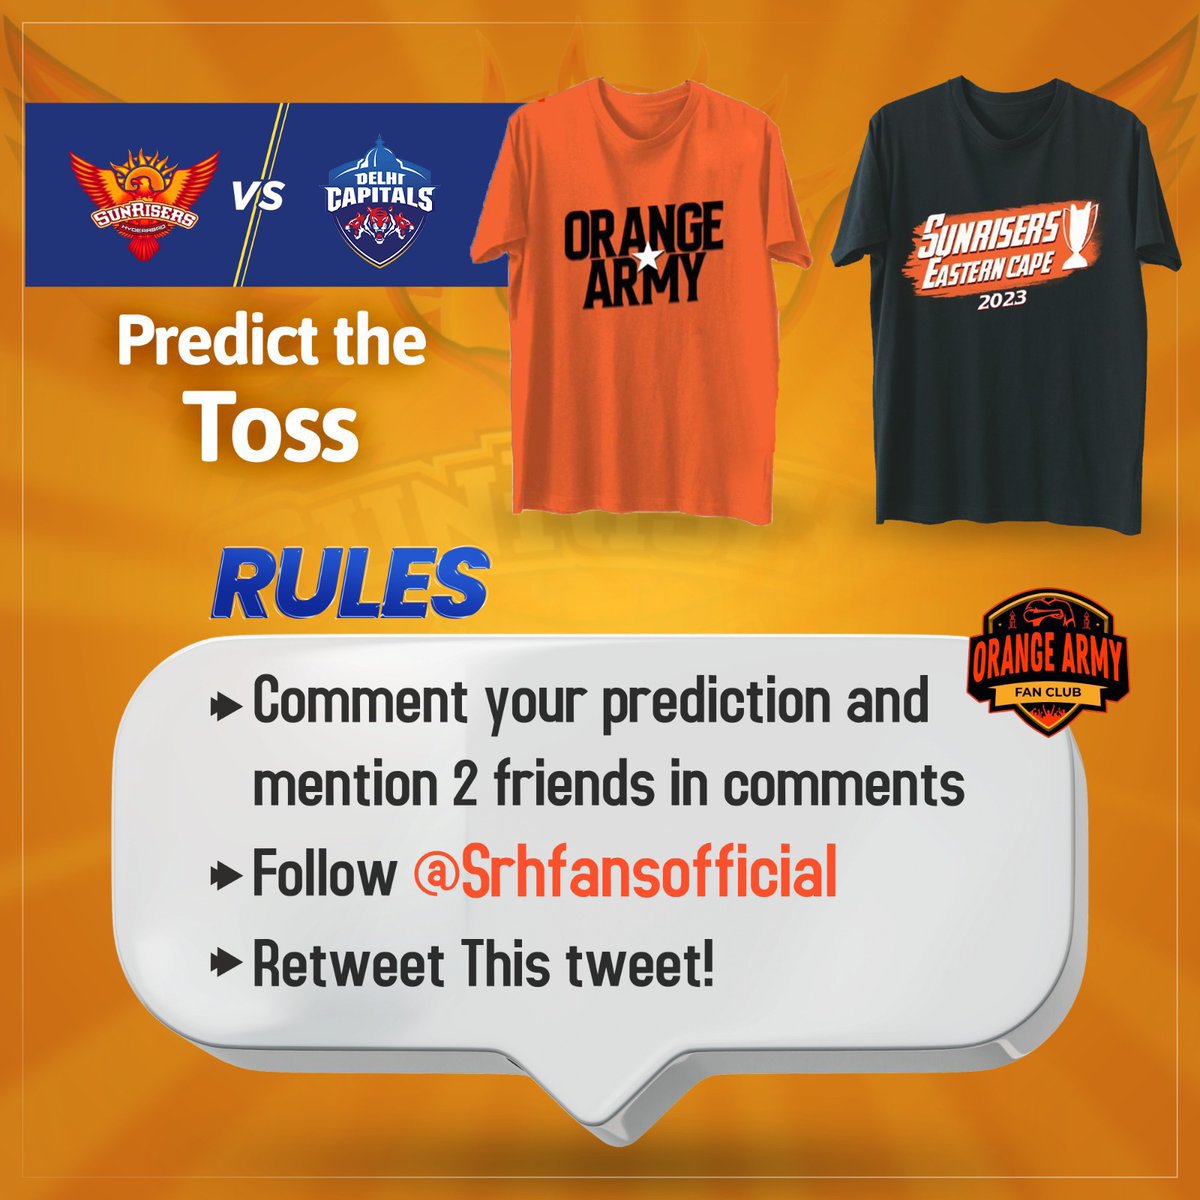 Contest Alert! Do Not forget to Follow the Rules #Orangearmy